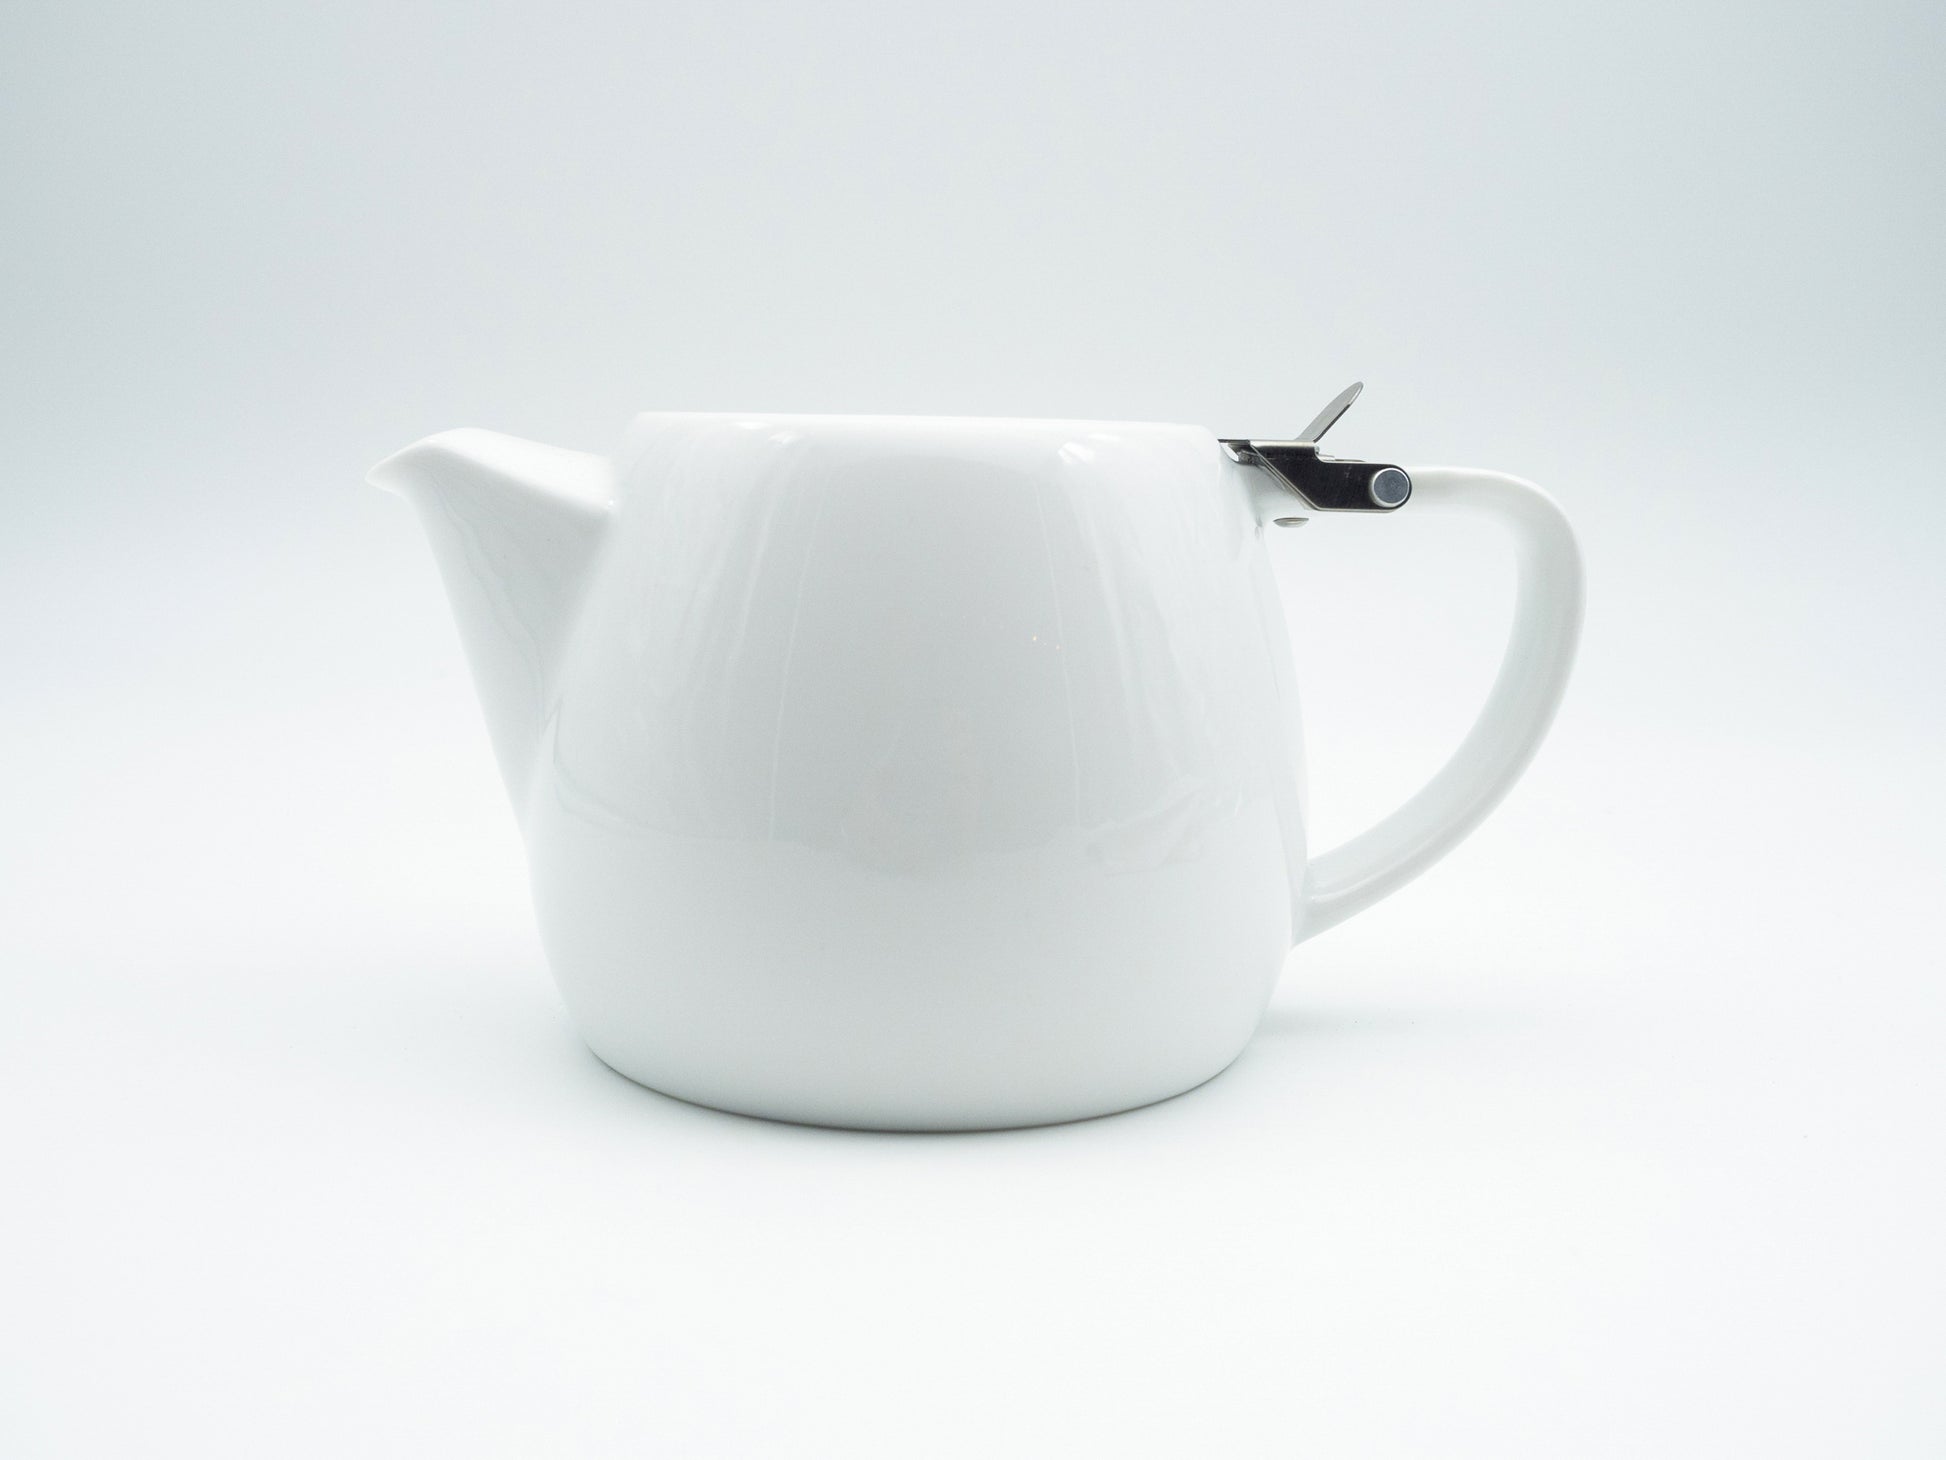 Side view of white porcelain stump tea pot with stainless steel lid and infuser basket